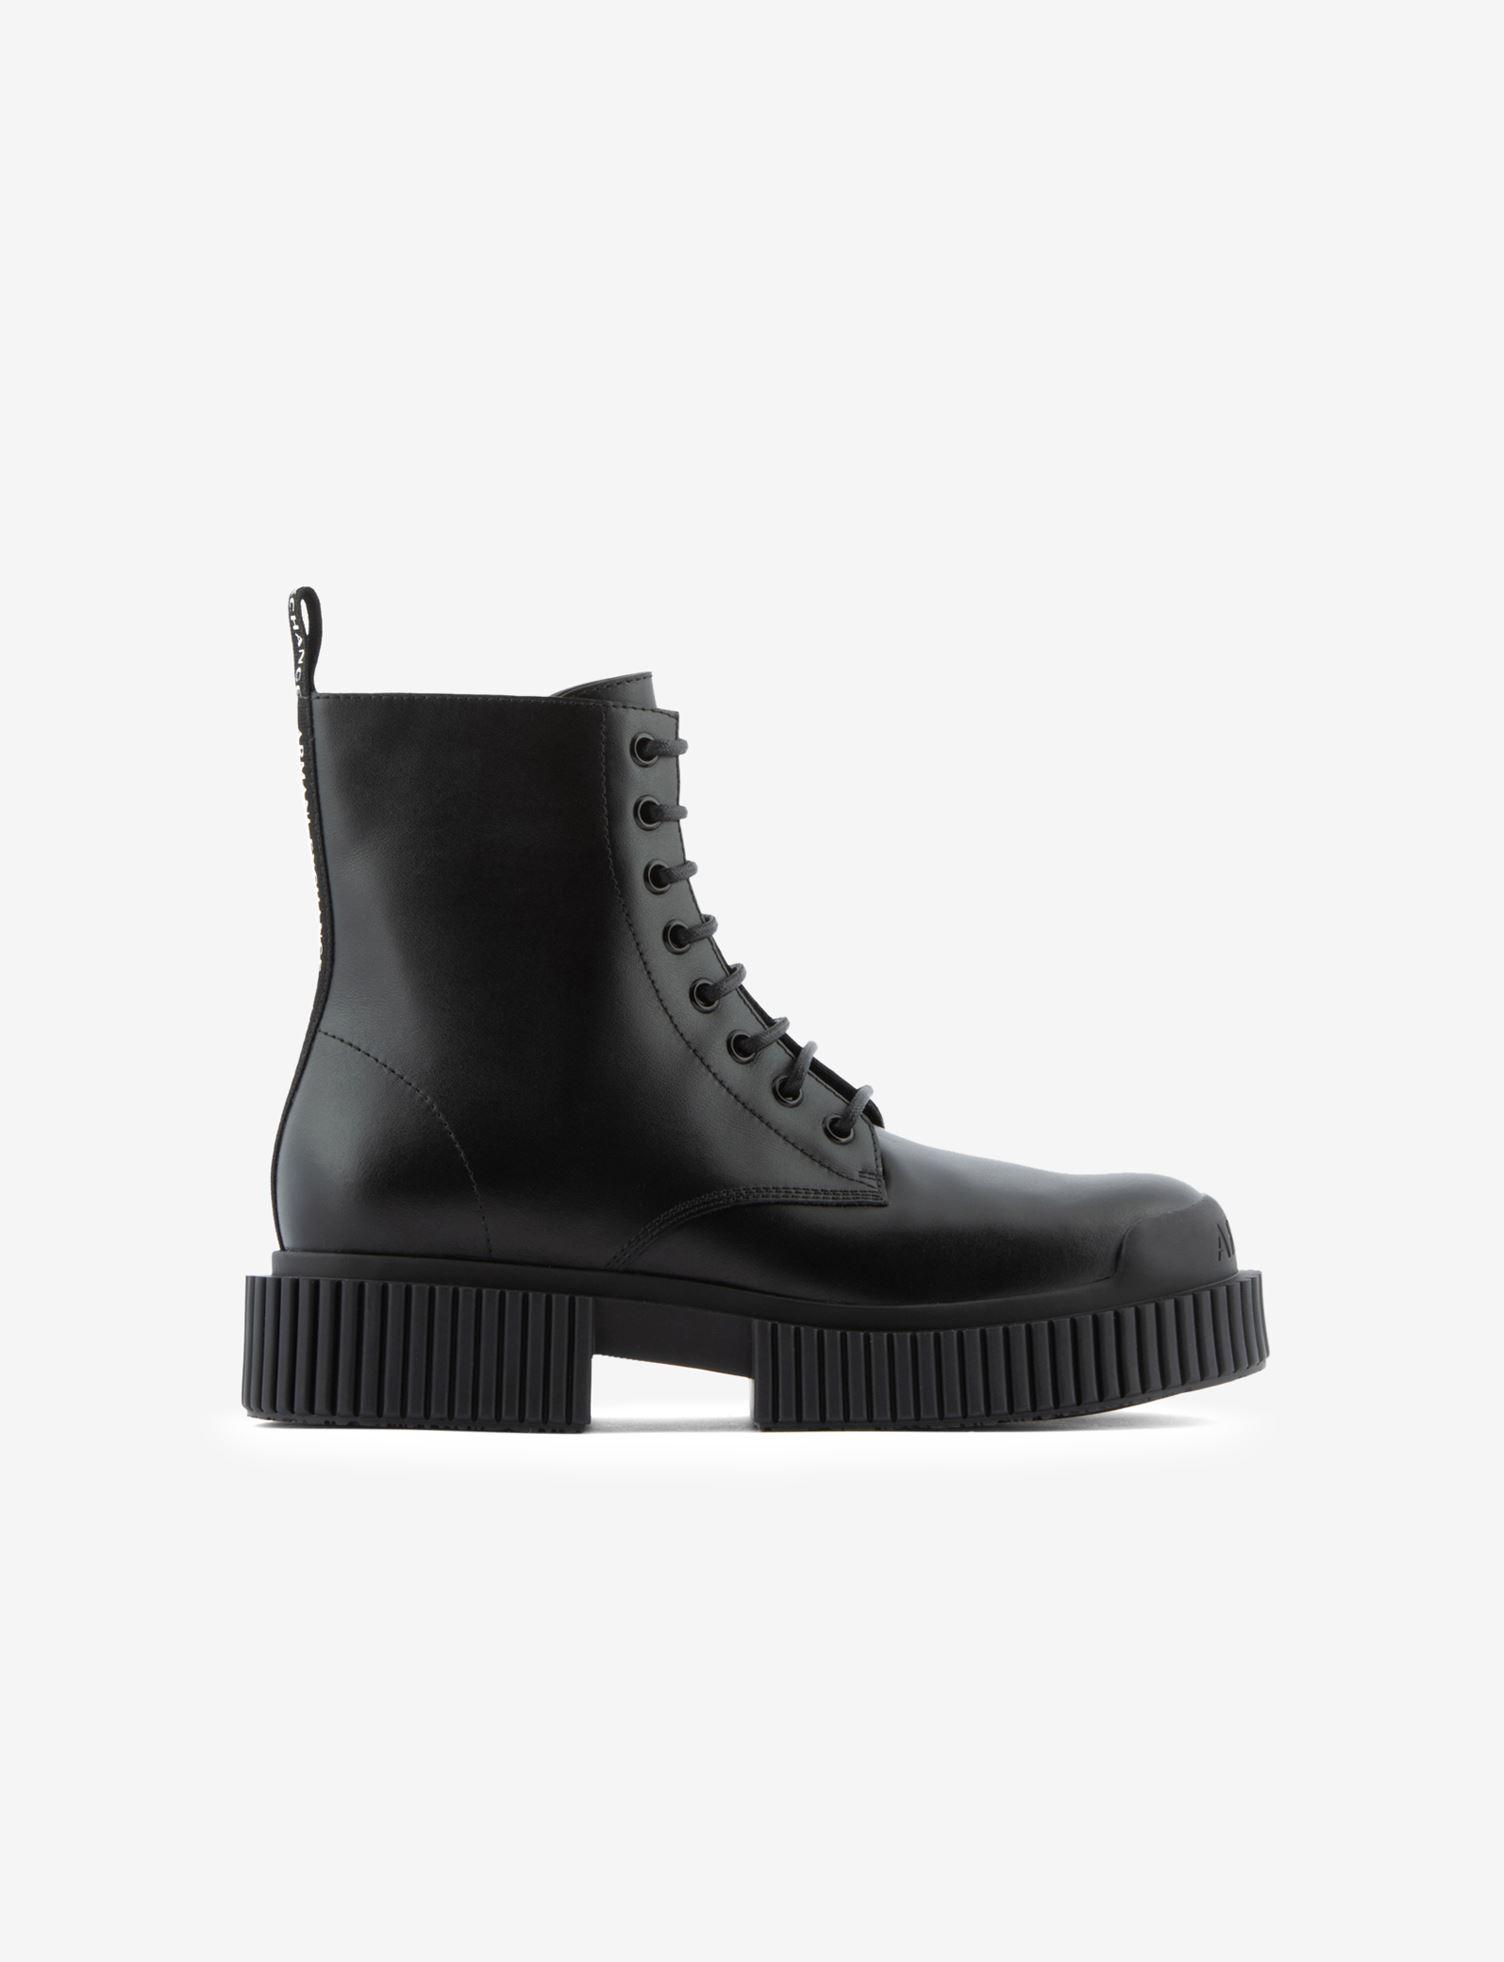 Armani Exchange Leather Combat Boots in Black | Lyst